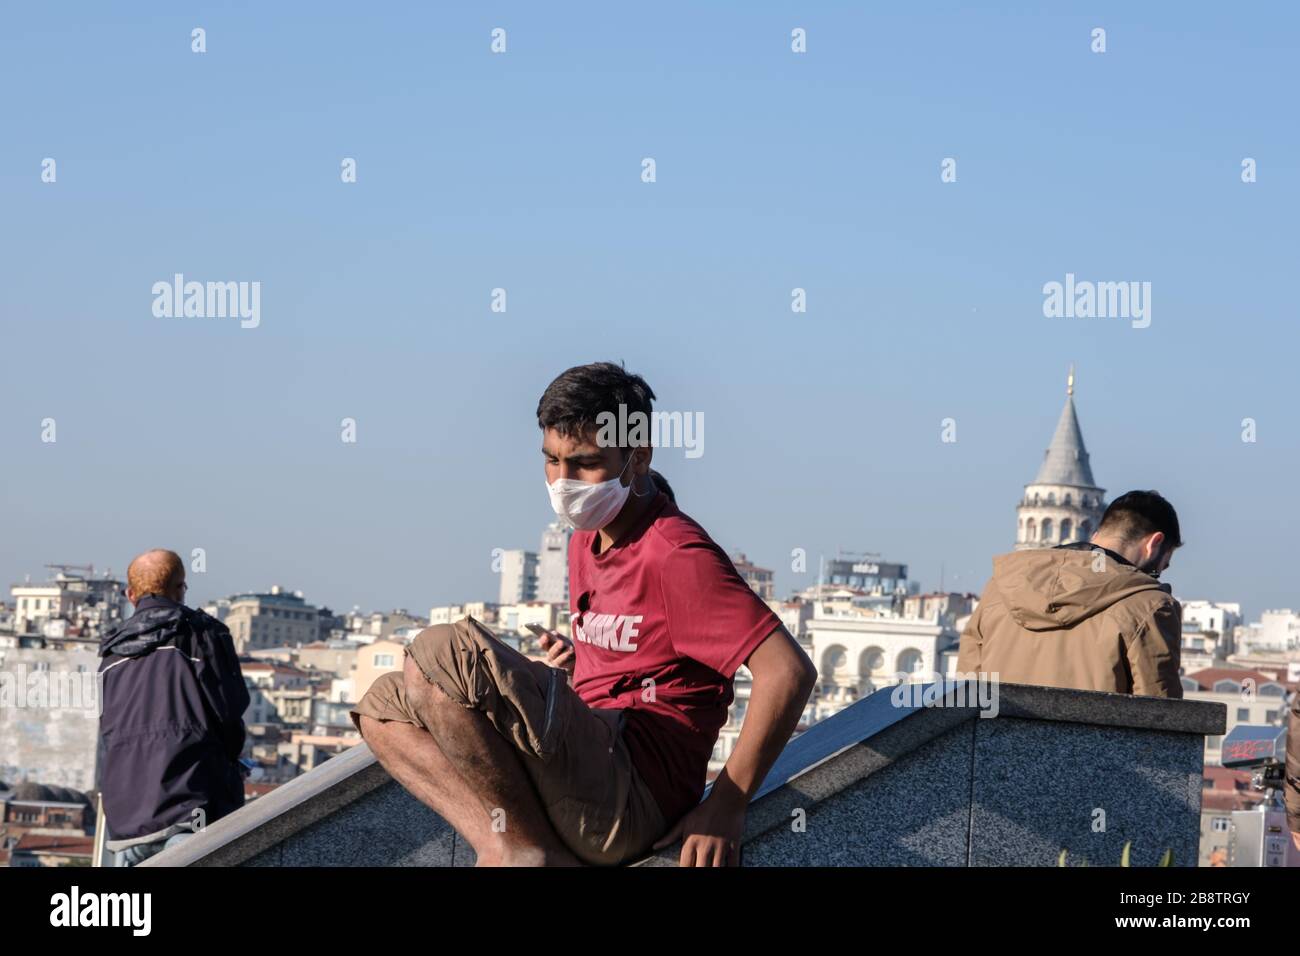 Istanbul, Turkey - 21 March, 2020:  A boy wearing surgical mask to protect from Corona virus (COVID-19) in istanbul. Stock Photo